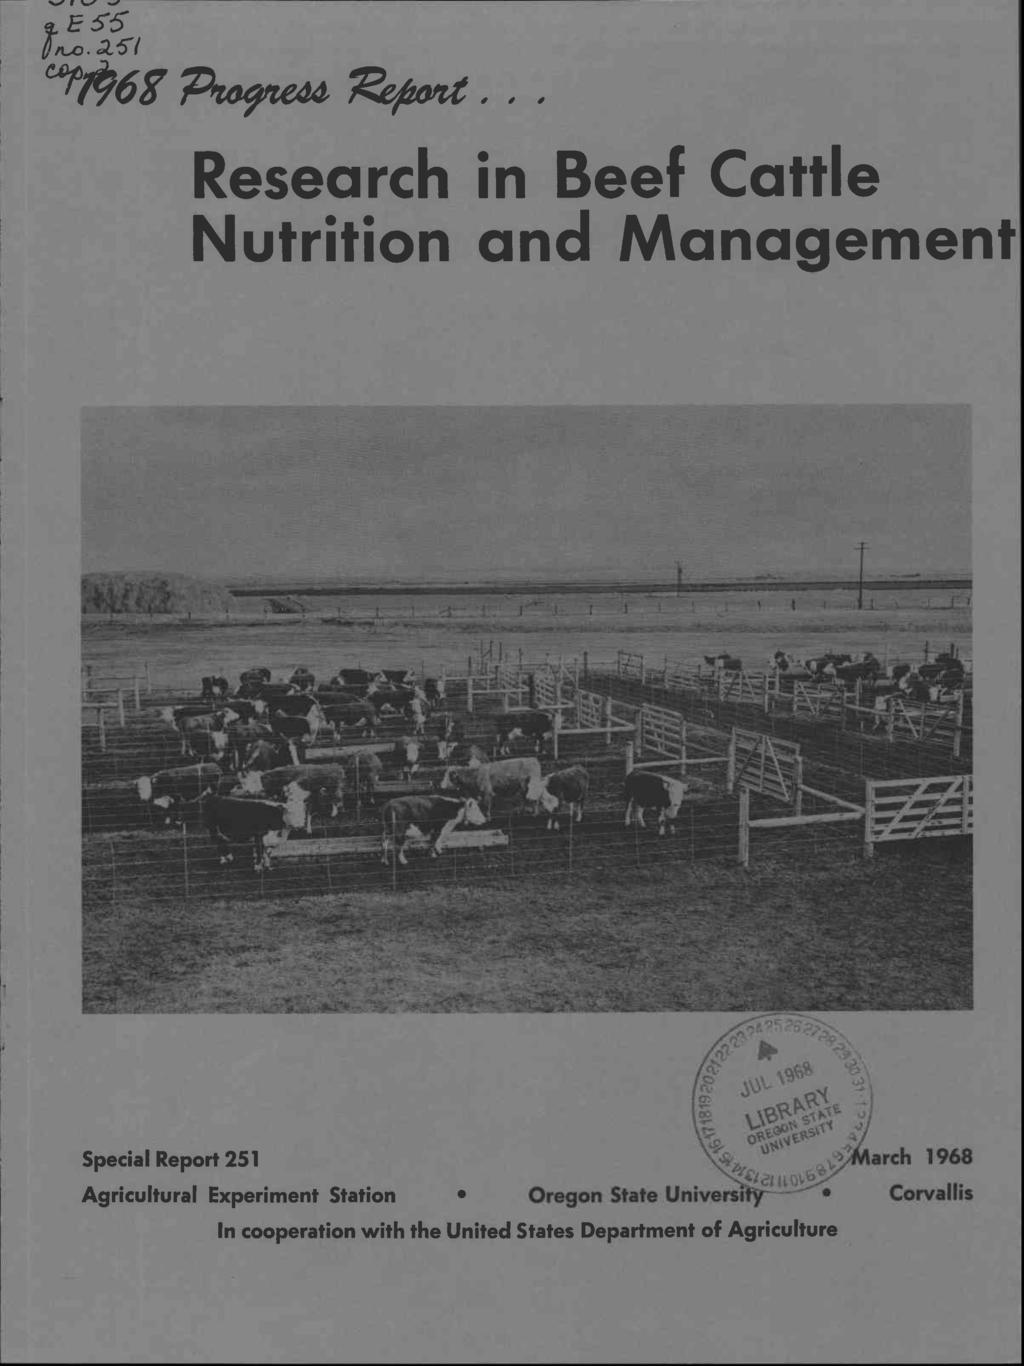 ie.5.;;;1 Aortedd Re./lent, Research in Beef Cattle Nutrition and Management :,r021:;liamistwooraiimm - k! kgr: zl -- Special Report 251 Agricultural Experiment Station cx.